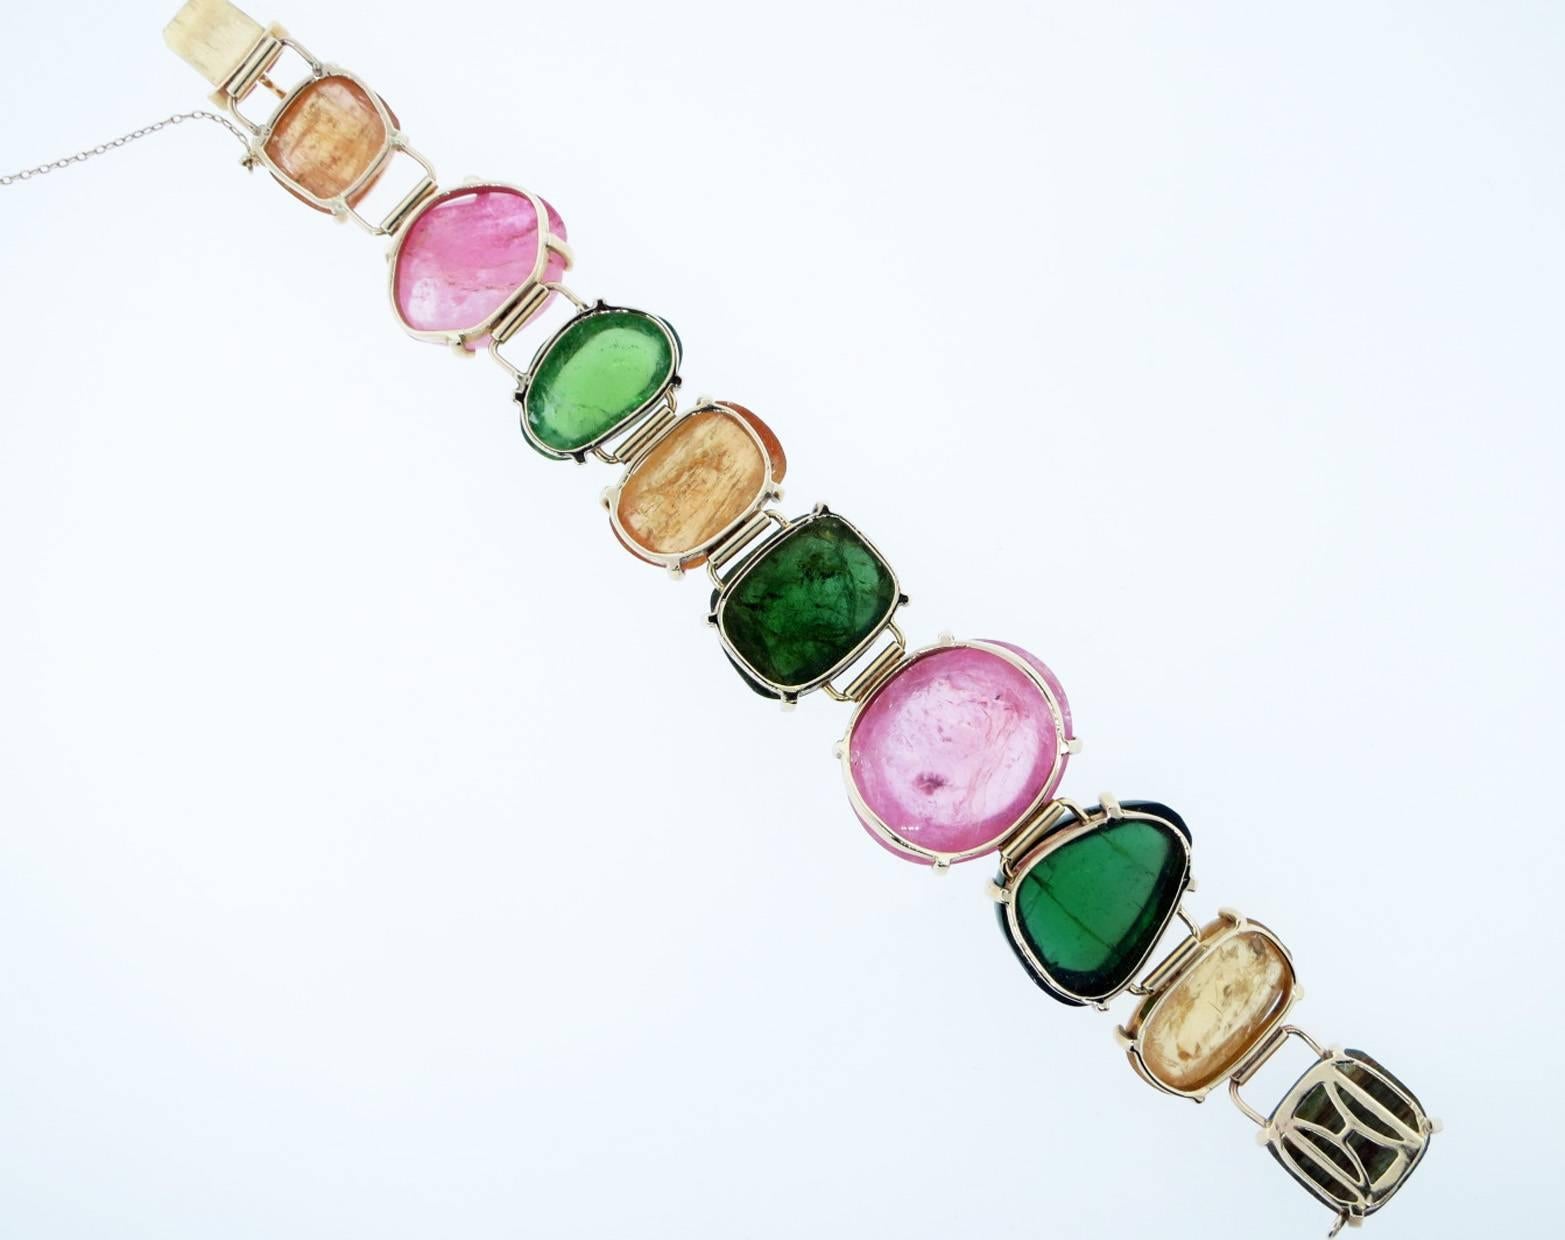 A chunky, fun and funky 14kt. yellow gold mixed tourmaline and citrine bracelet in tumbled forms made in the great state of Maine ! The bracelet measures approx 7 inches in length and 1 inch in width at the widest center stone. 